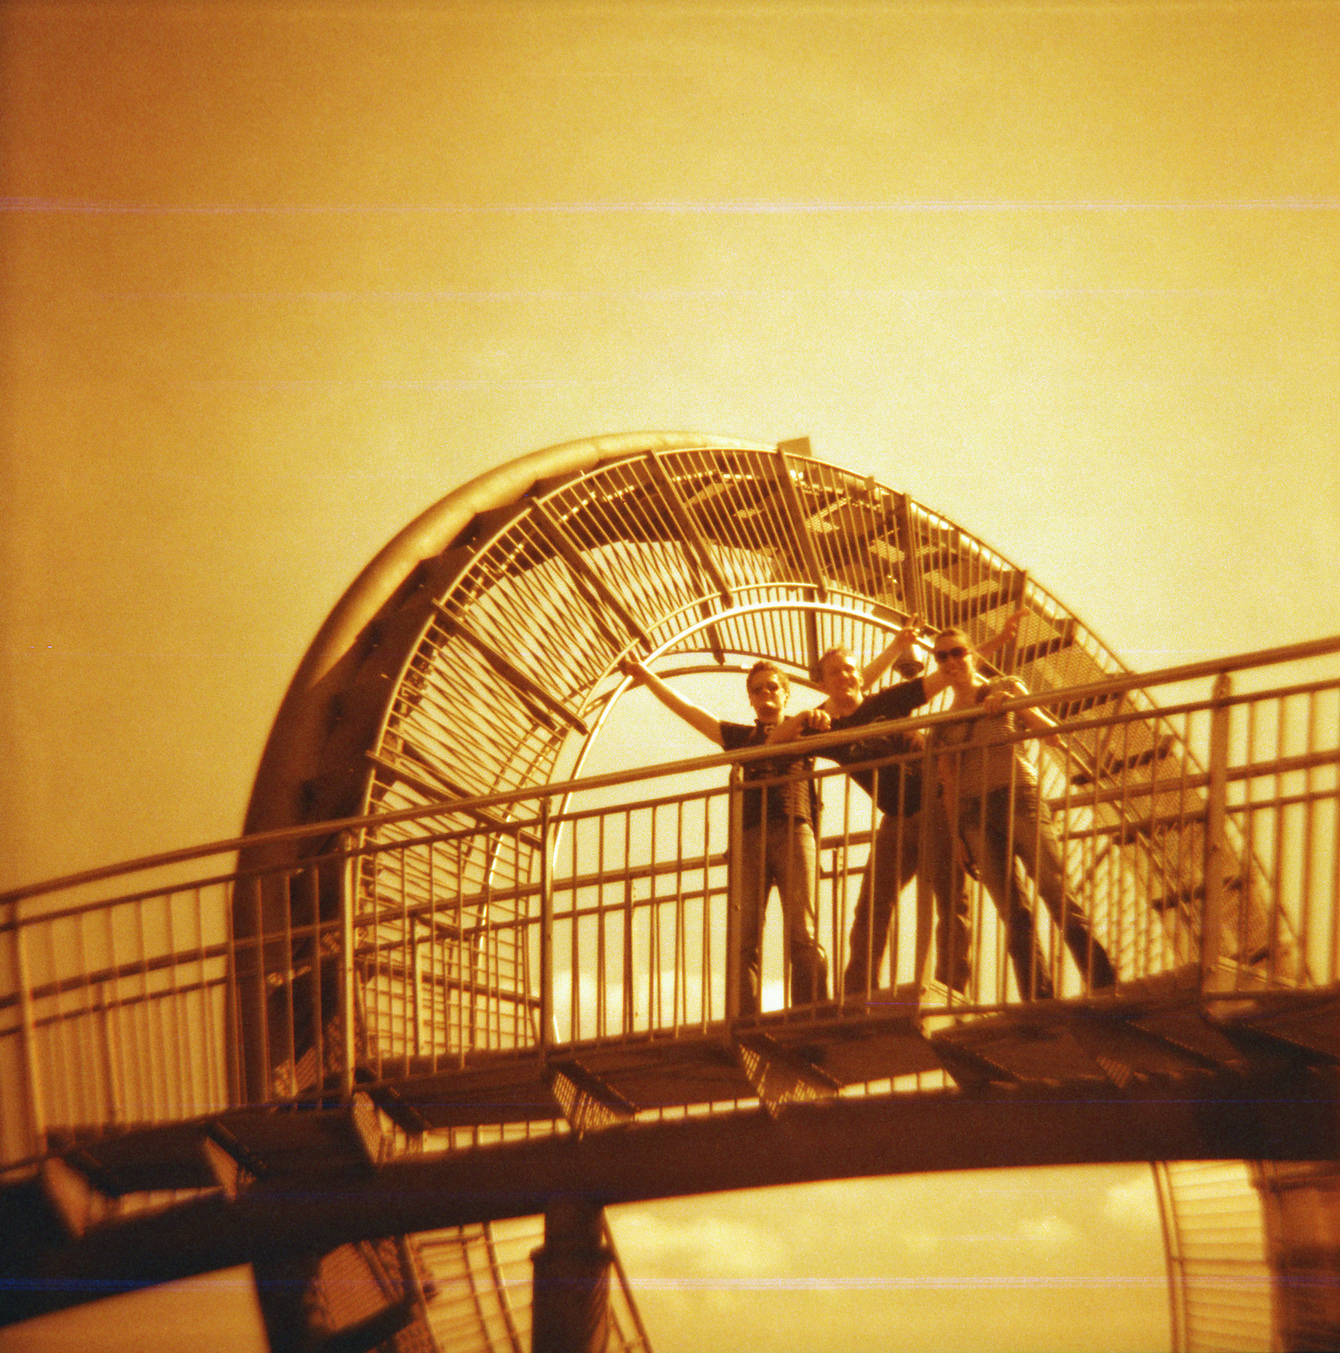 Tiger & Turtle in Duisburg - Redscale Diana F+ - "Fee ist mein Name"